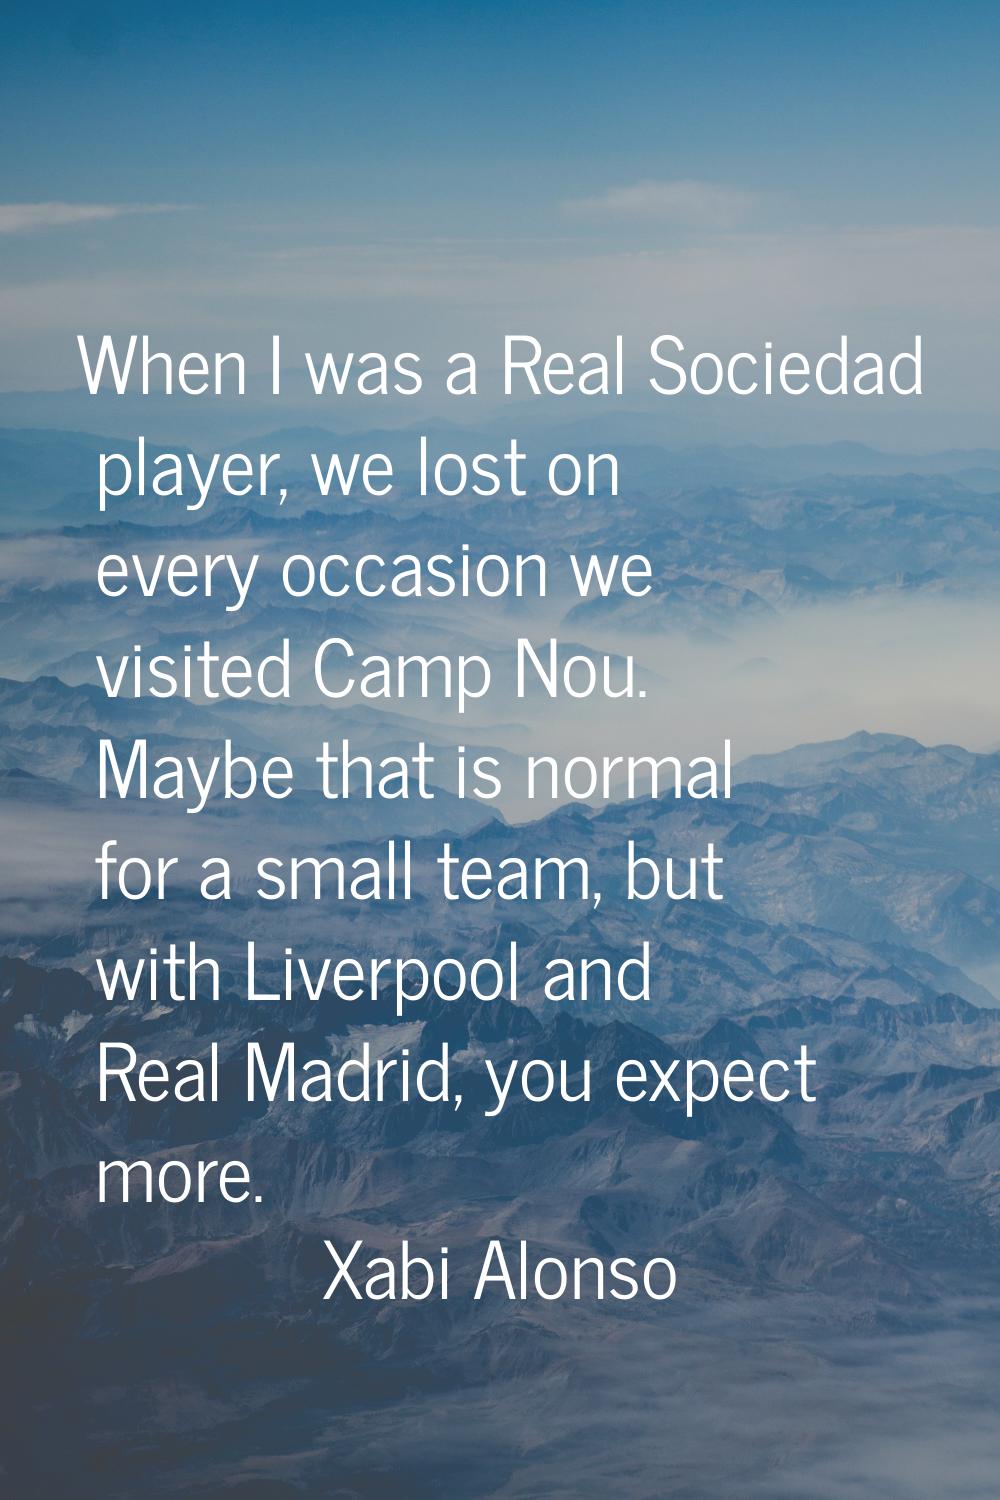 When I was a Real Sociedad player, we lost on every occasion we visited Camp Nou. Maybe that is nor